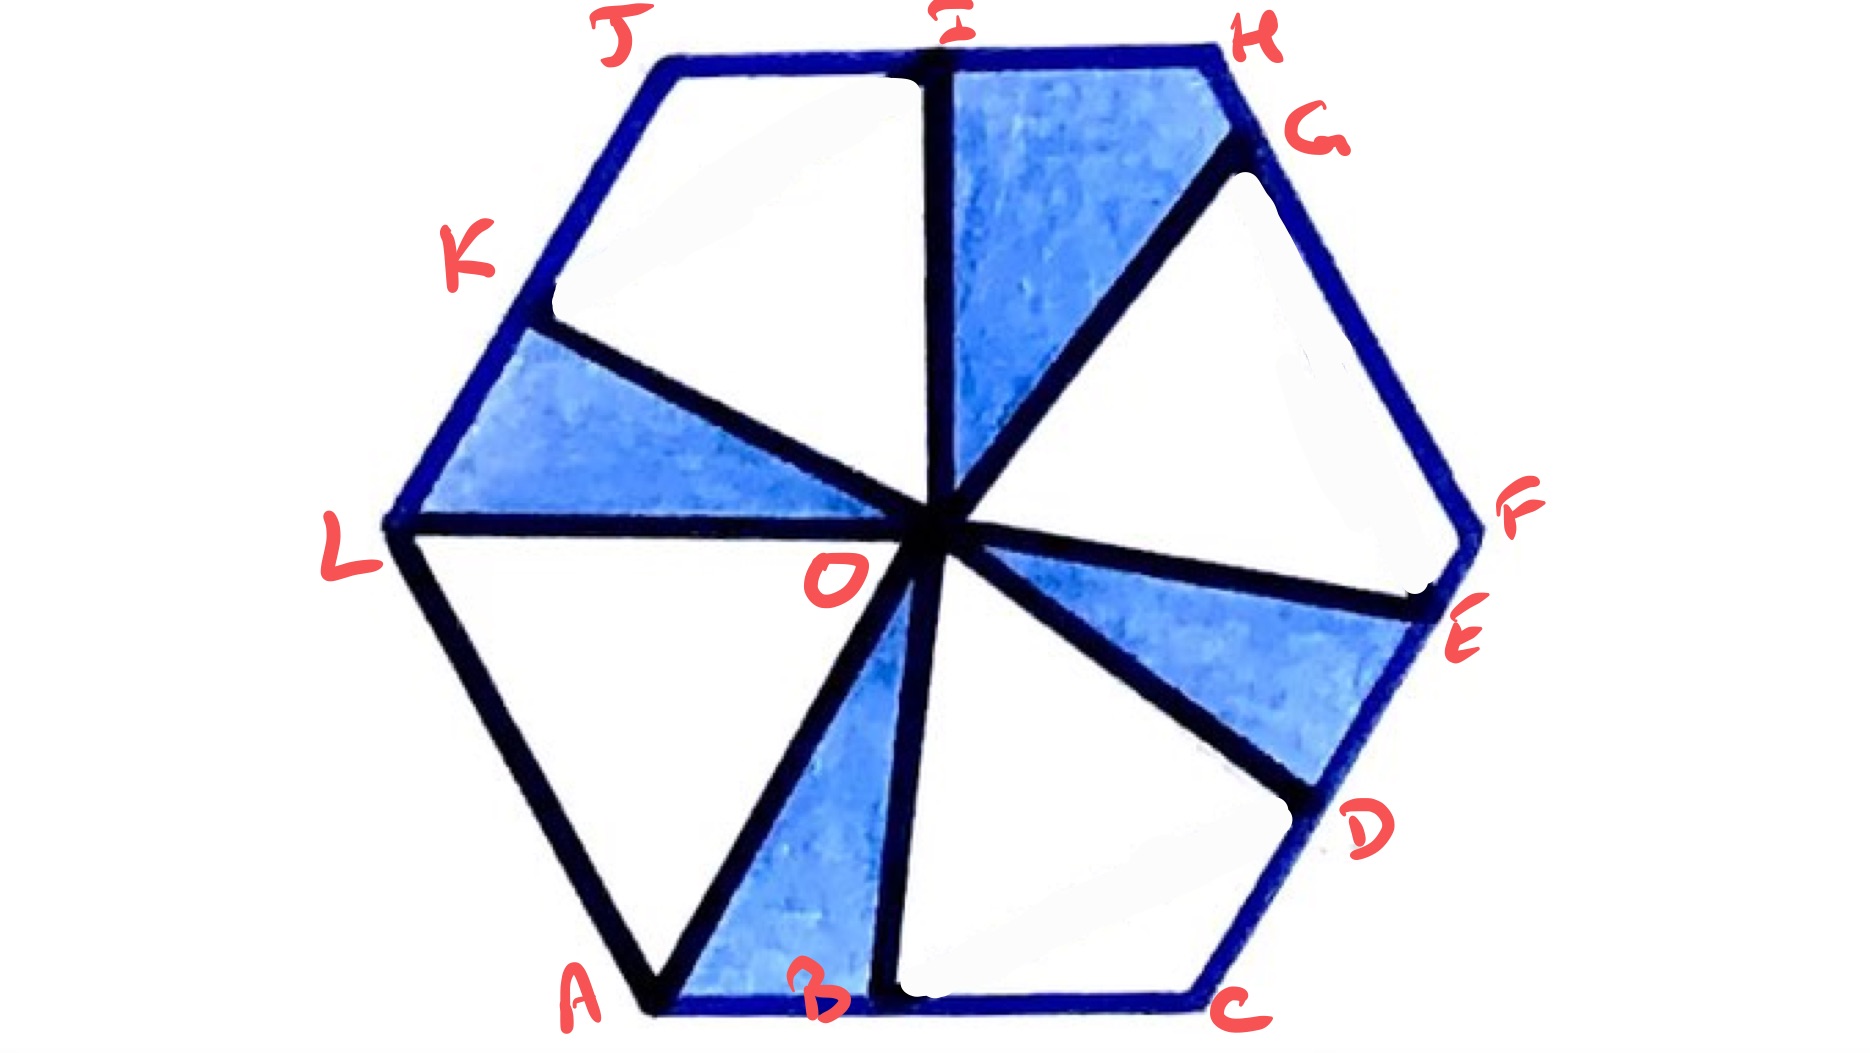 Four equilateral triangles inside a hexagon with labels